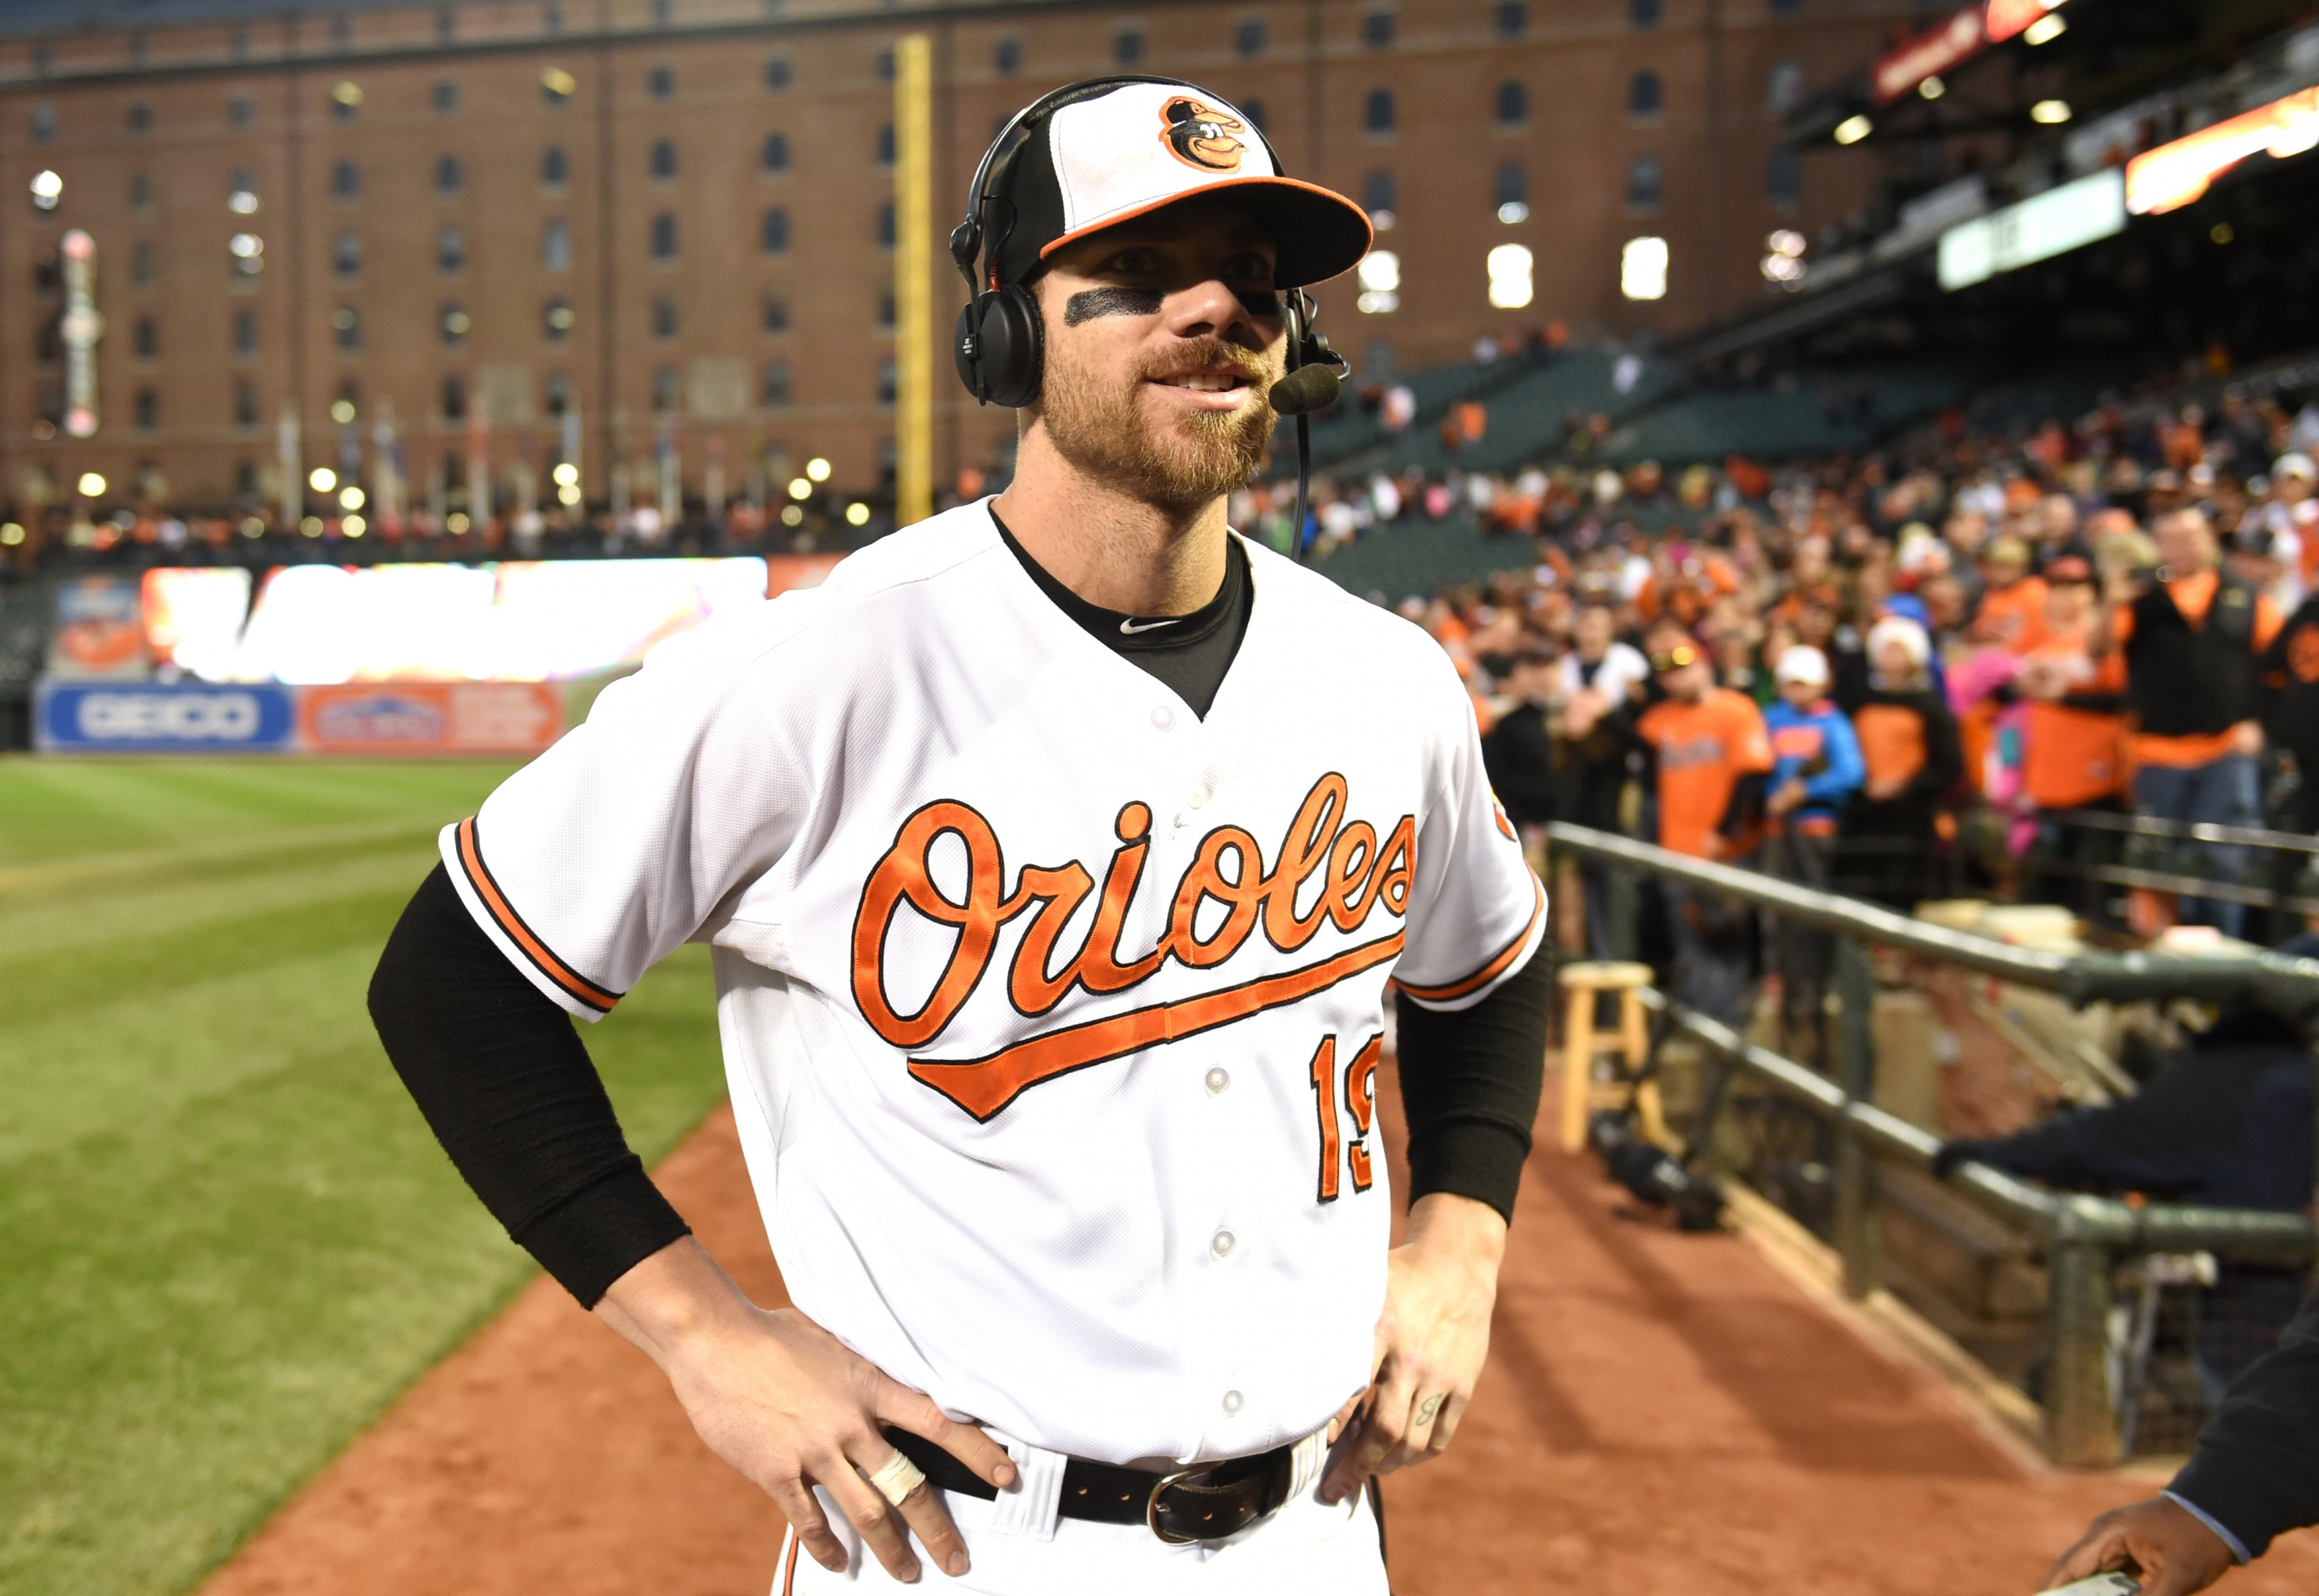 MLB trade rumors and news: Chris Davis breaks his historic hitless streak,  the contract extensions continue - MLB Daily Dish